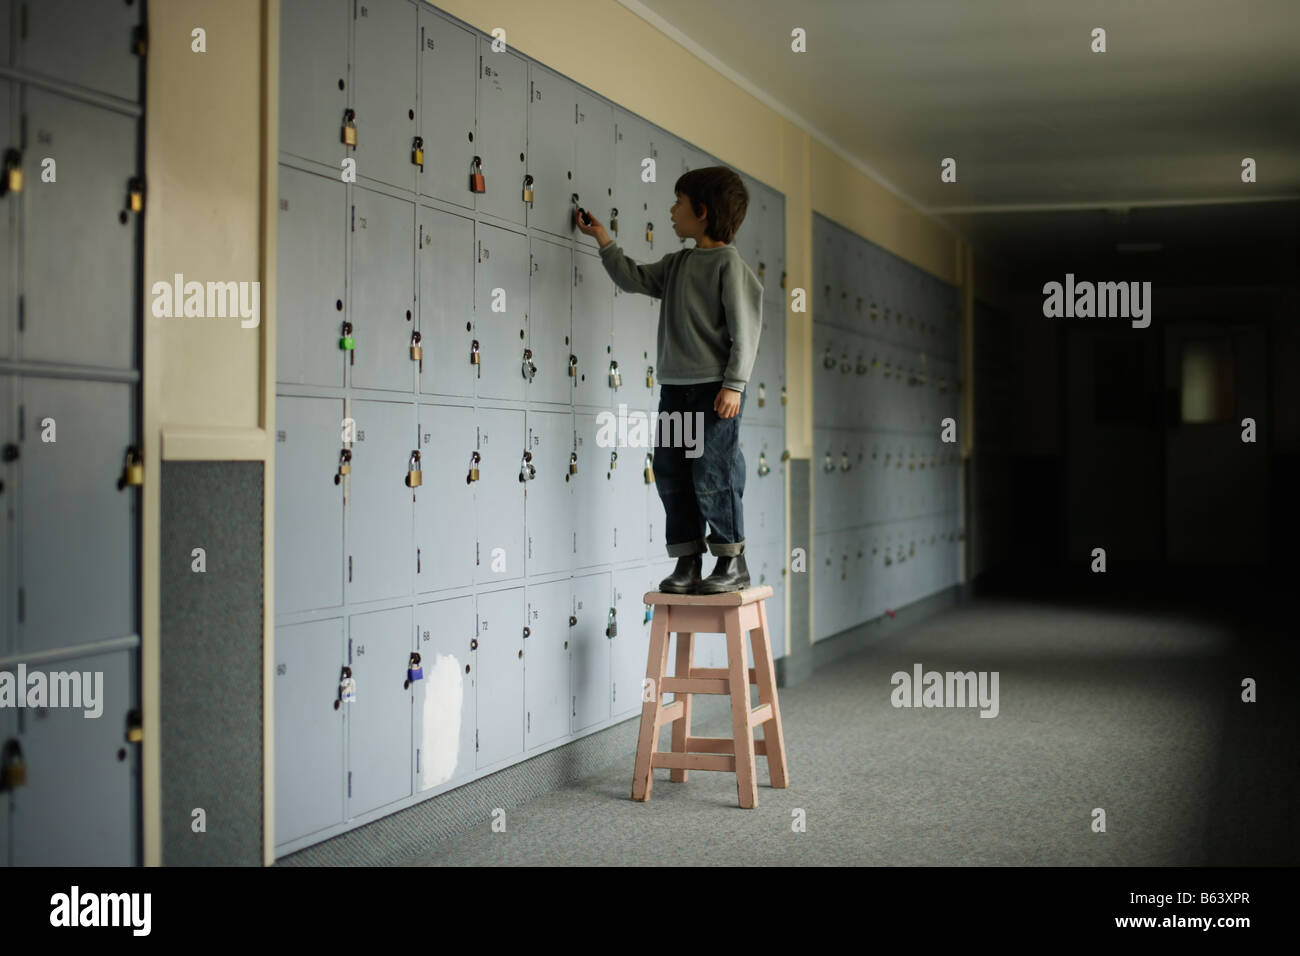 Six year old boy stands on stool in school corridor to reach top locker Stock Photo